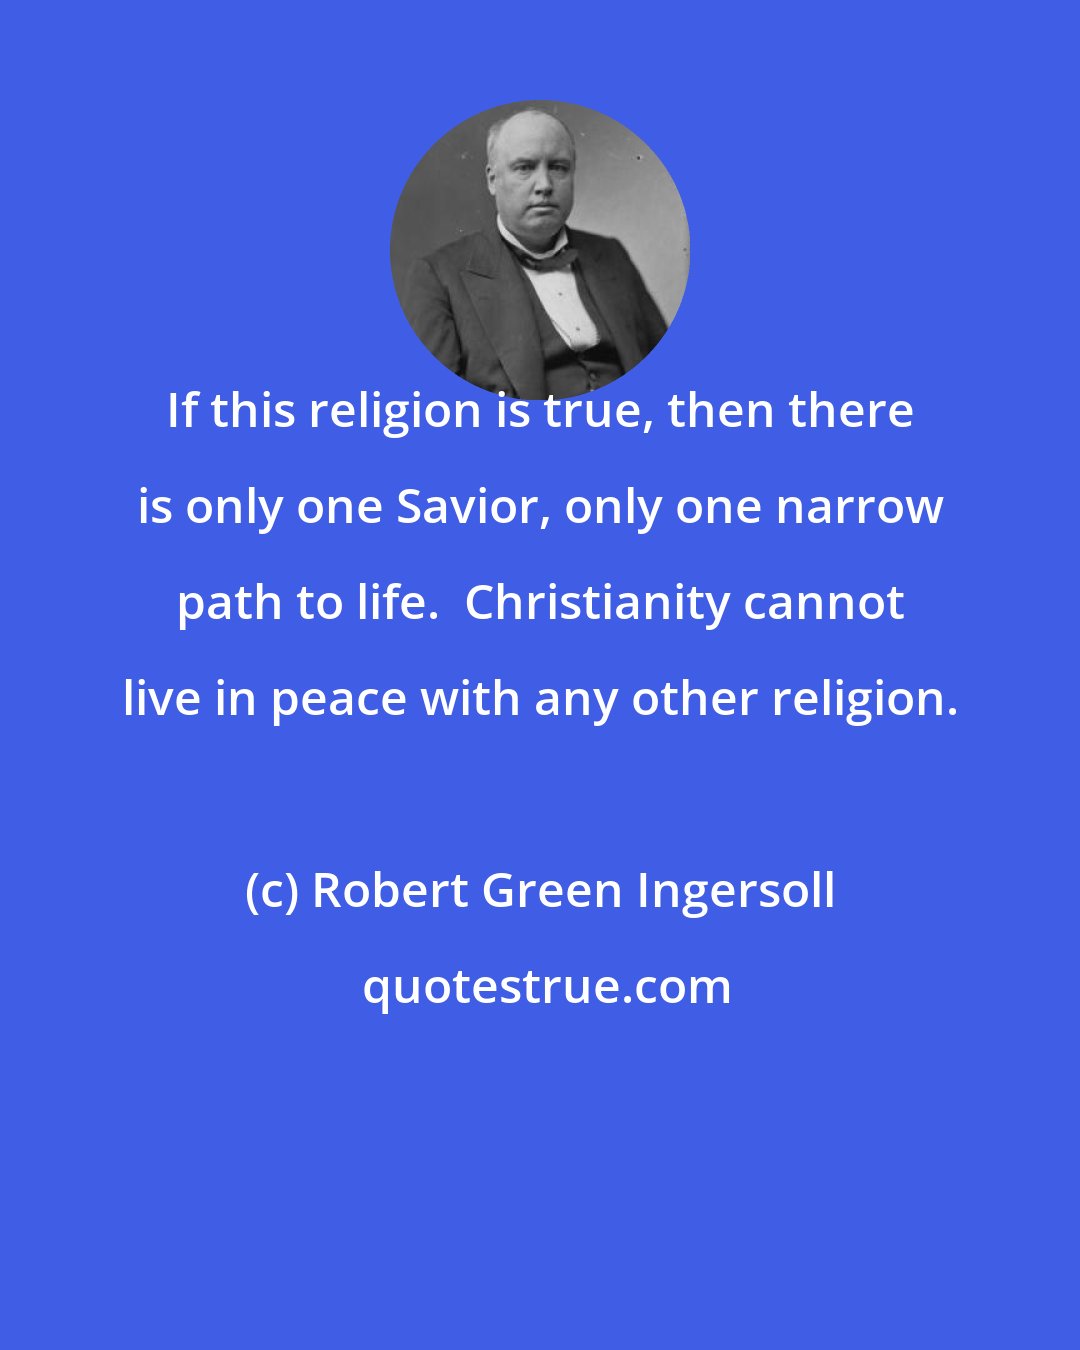 Robert Green Ingersoll: If this religion is true, then there is only one Savior, only one narrow path to life.  Christianity cannot live in peace with any other religion.